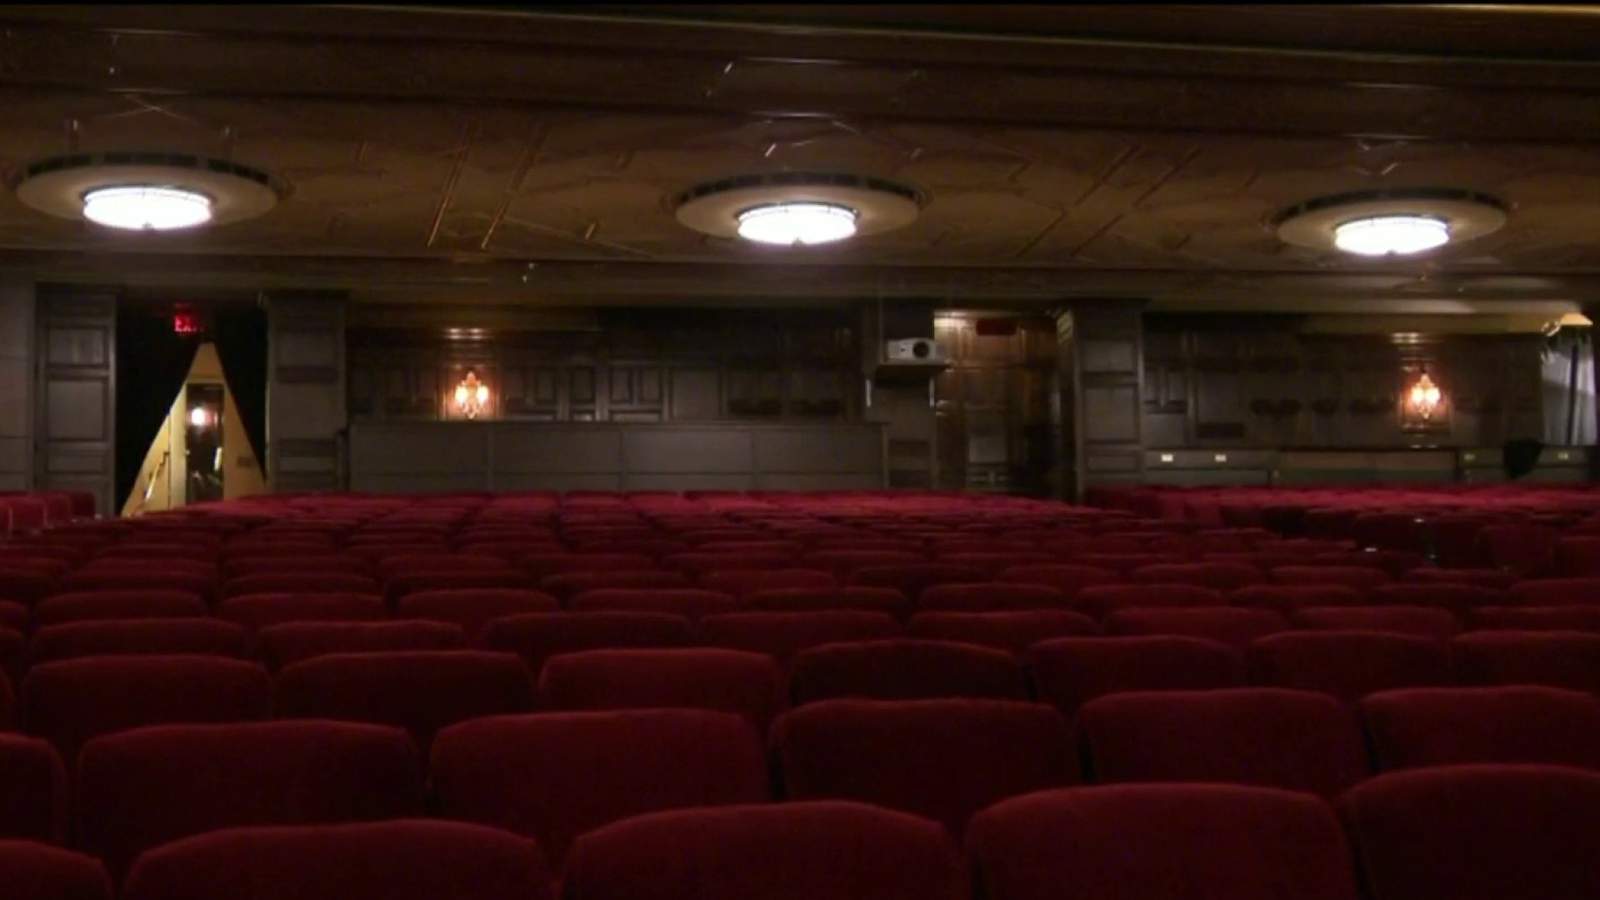 Detroit Music Hall holds the history of Detroit’s entertainment